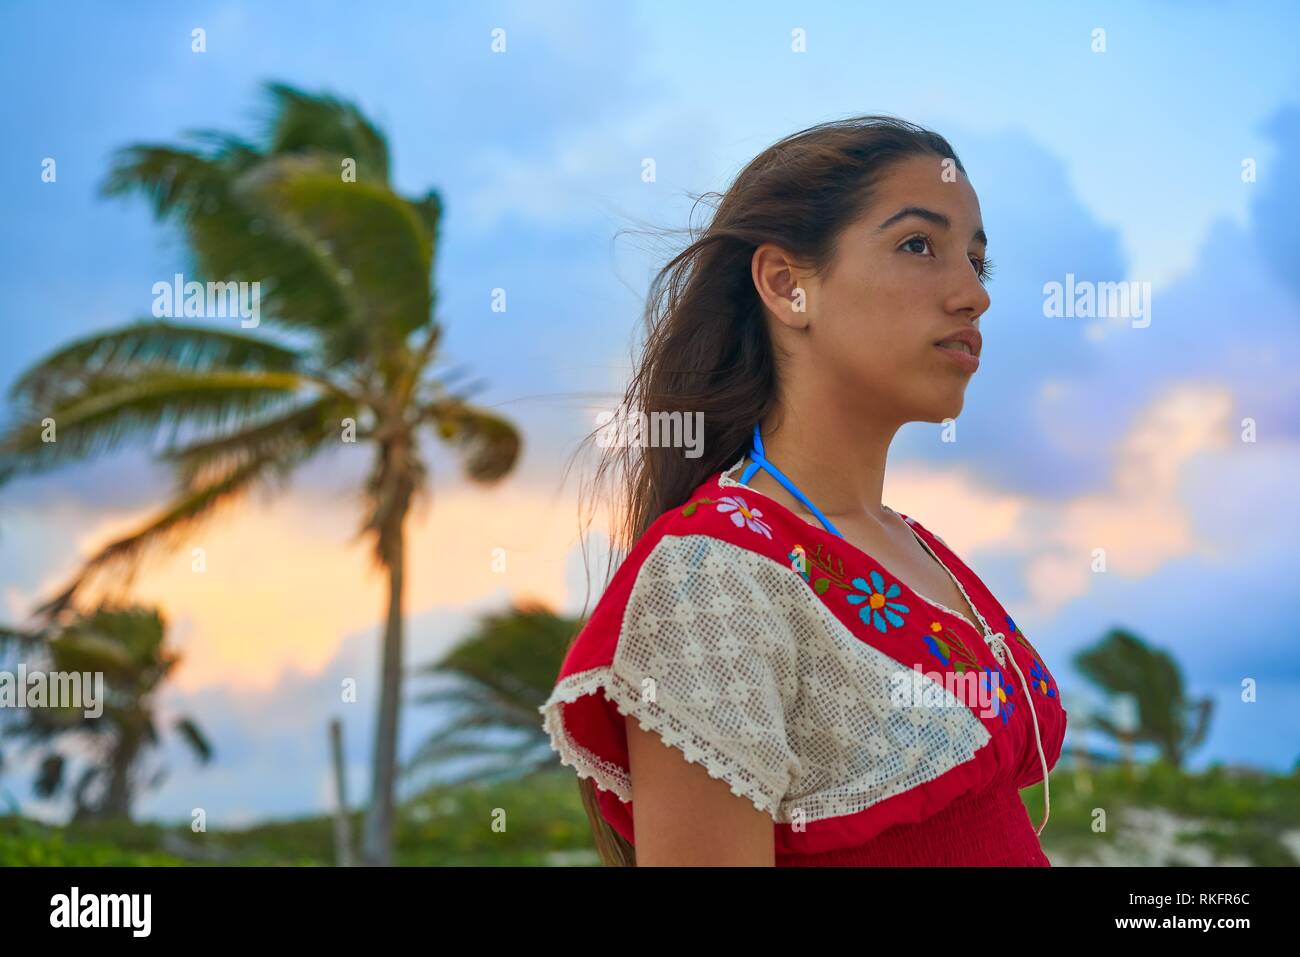 Mexican girl embrodery dress at sunset in Caribbean palm trees. Stock Photo